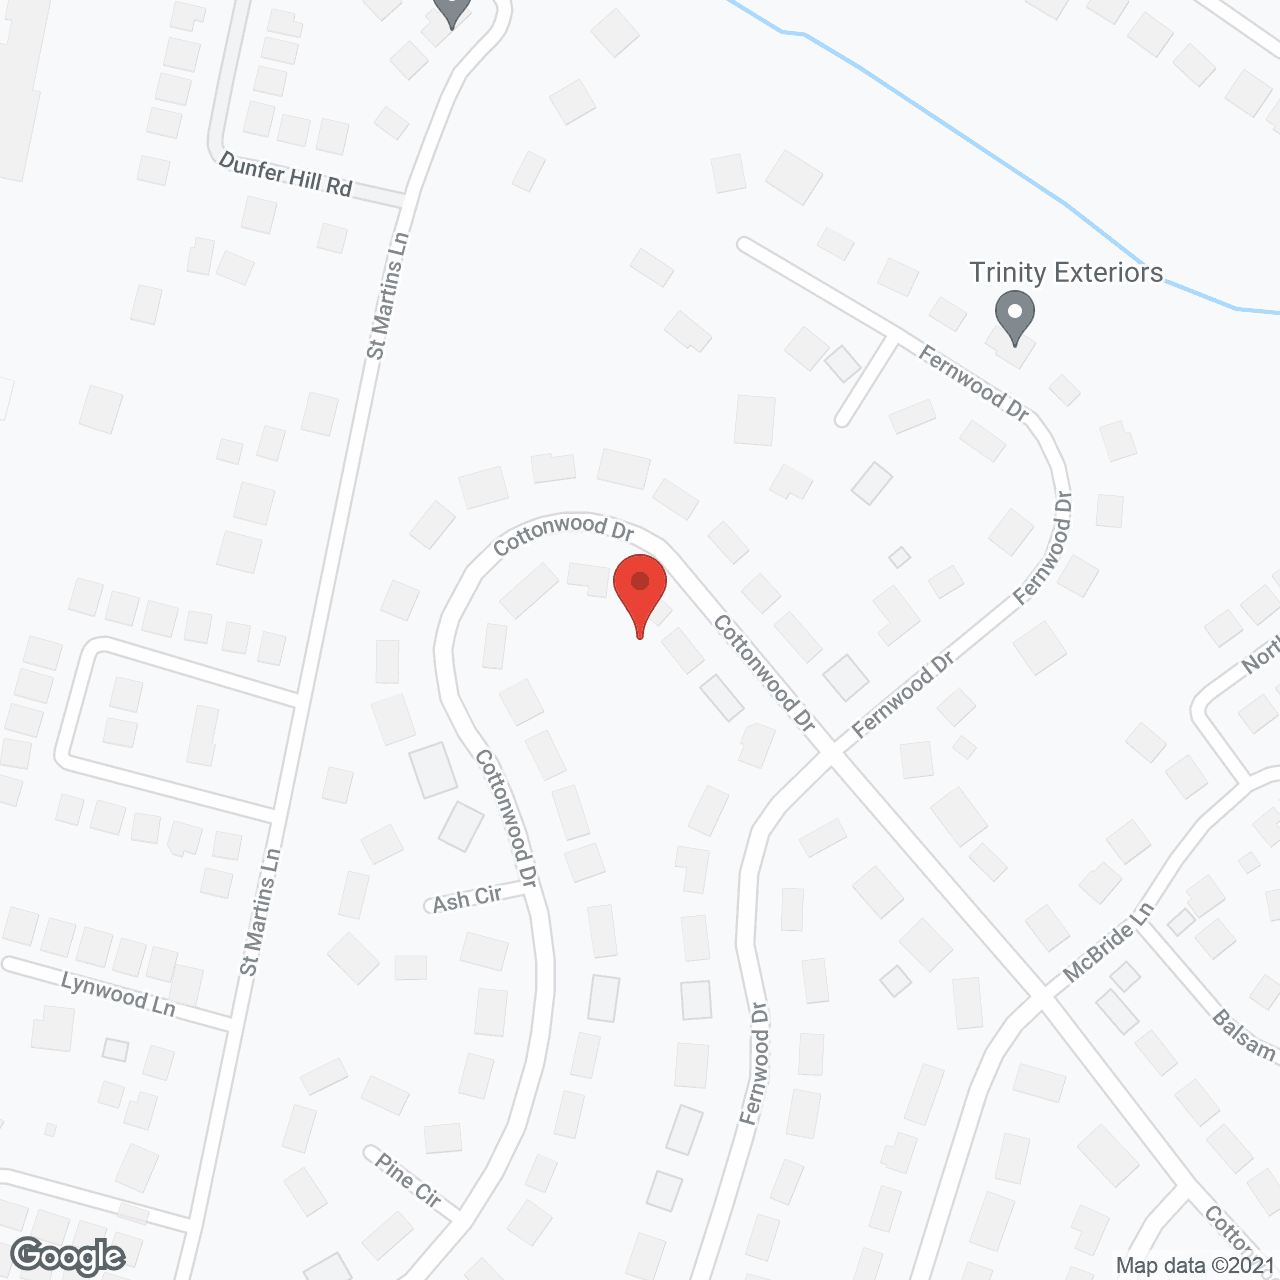 Radiant Health Services in google map